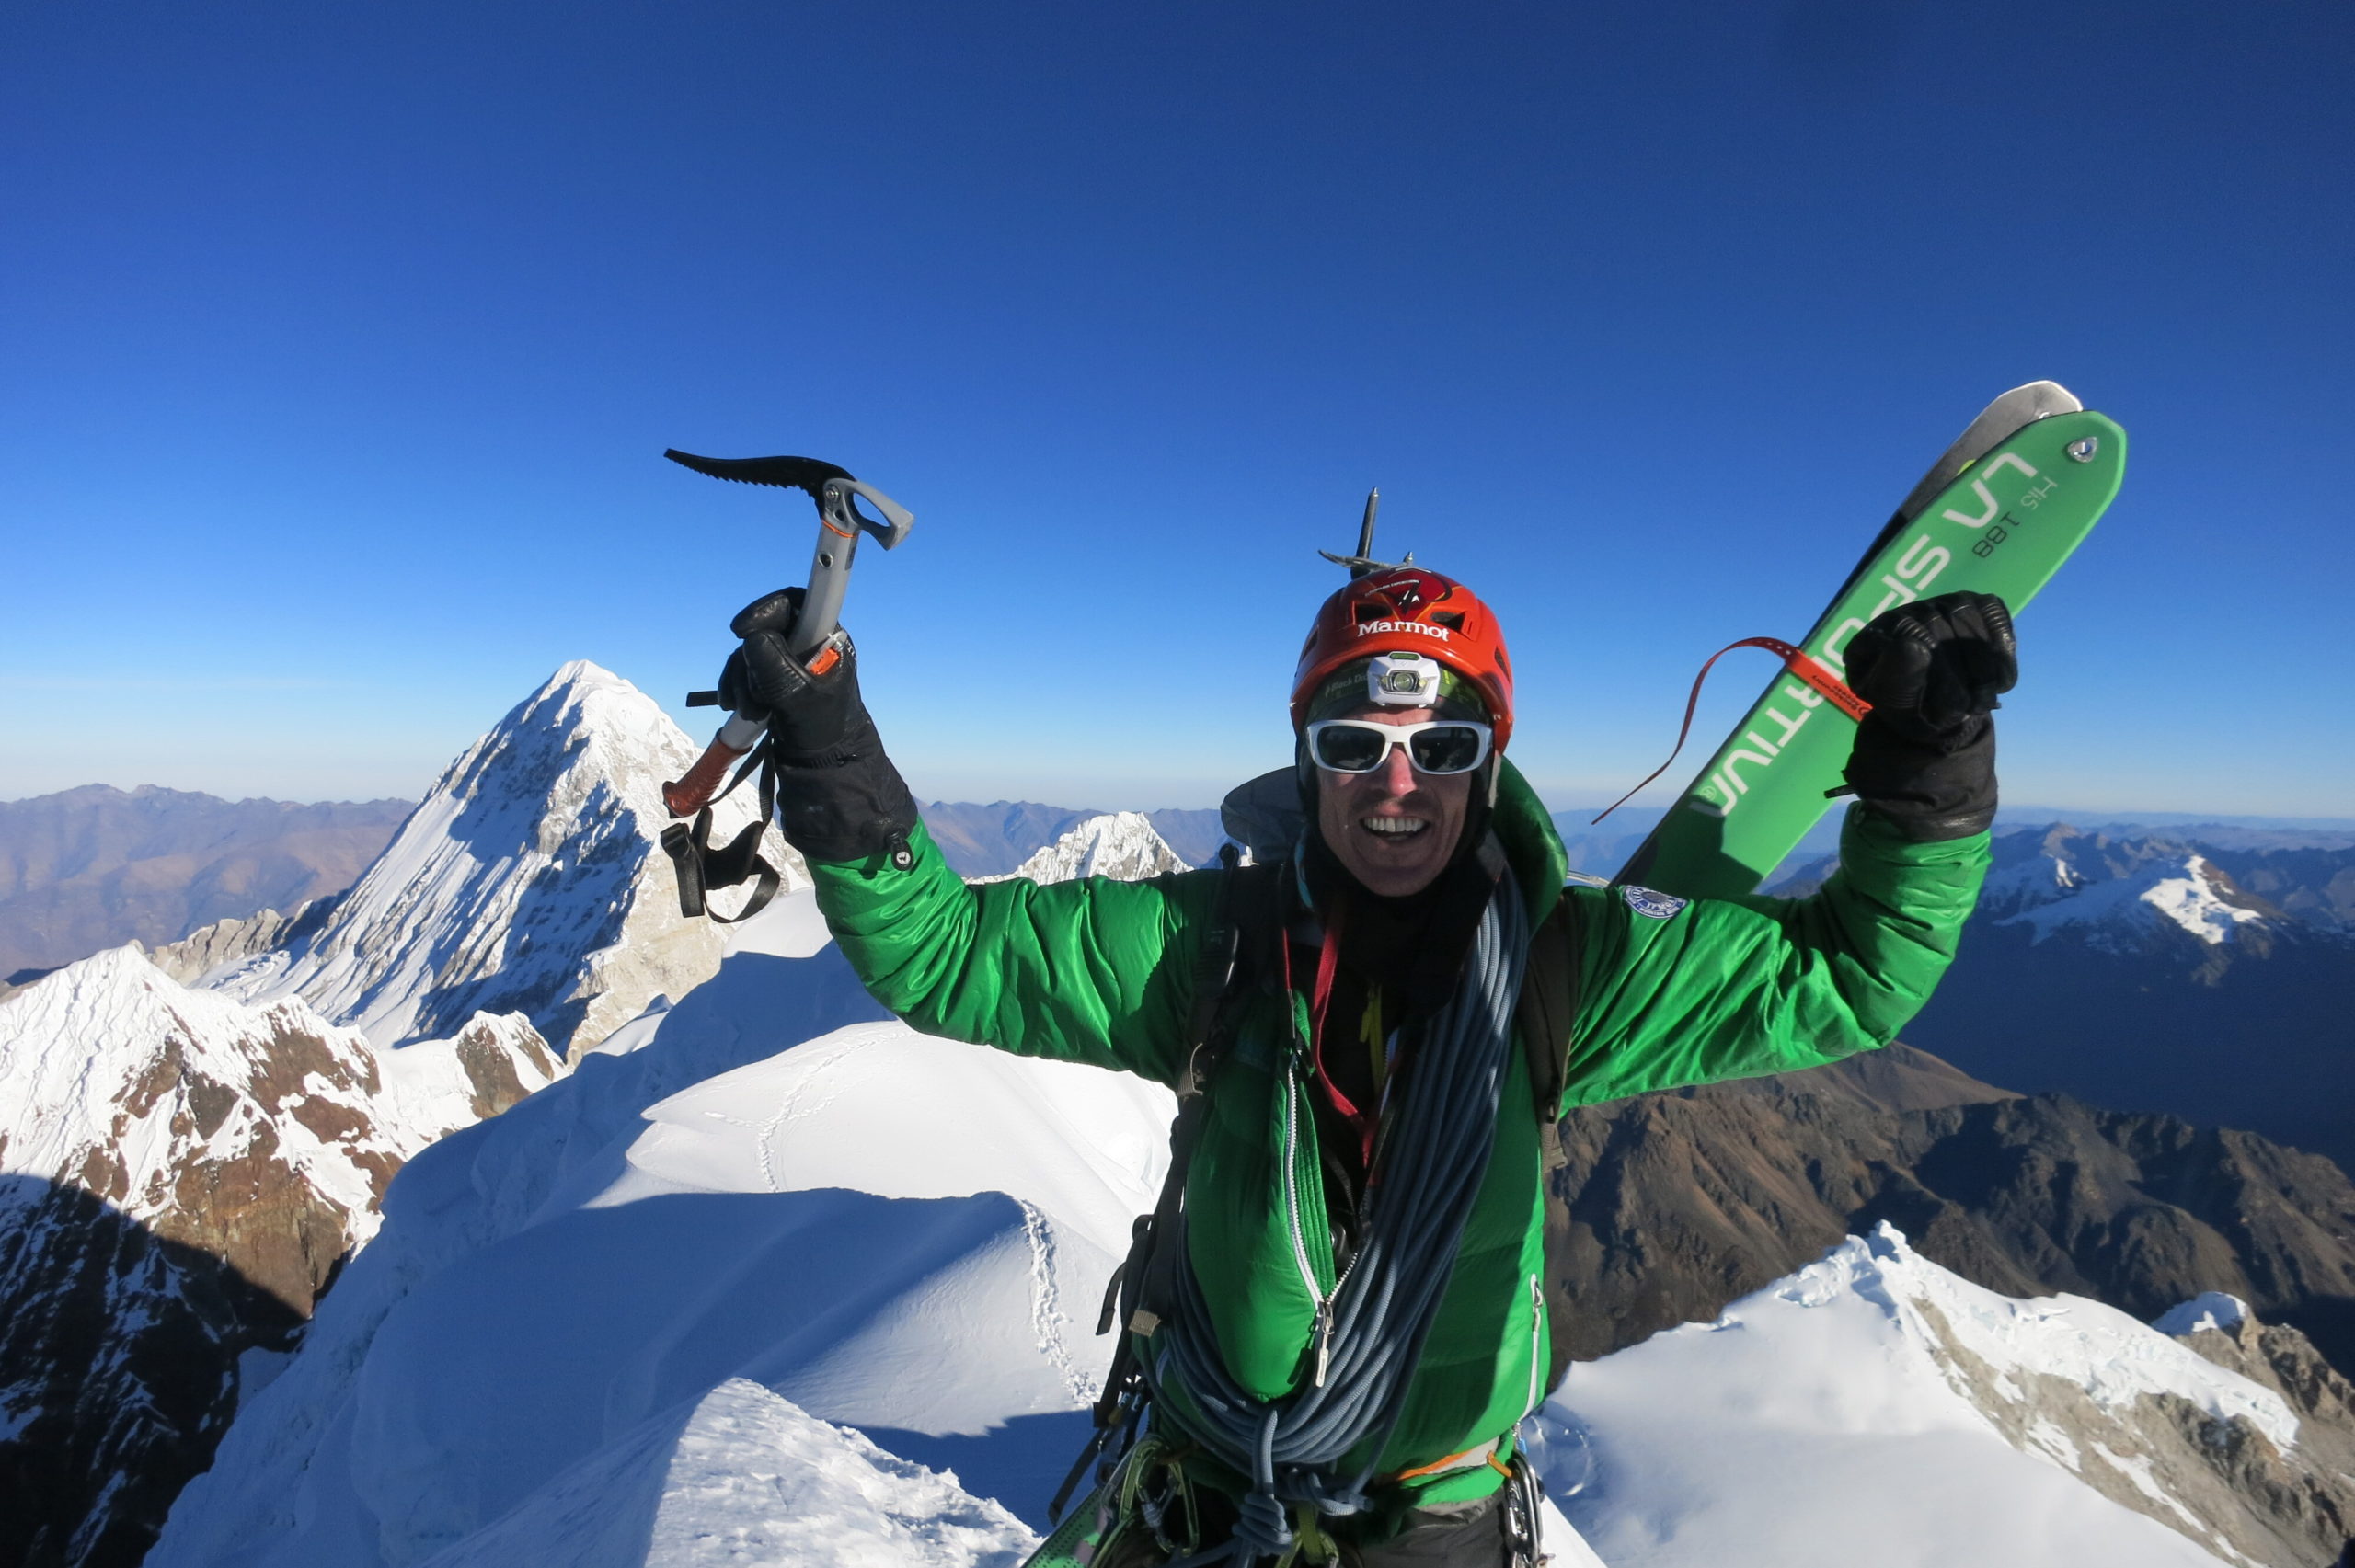 Adrian stands on top of a mountain holding an ice axe in one hand and his gloved fist raised in the other. His skis are on his back. He's wearing sunglasses, a headlamp, and a helmet. Snowcapped speaks are all around him in the background.